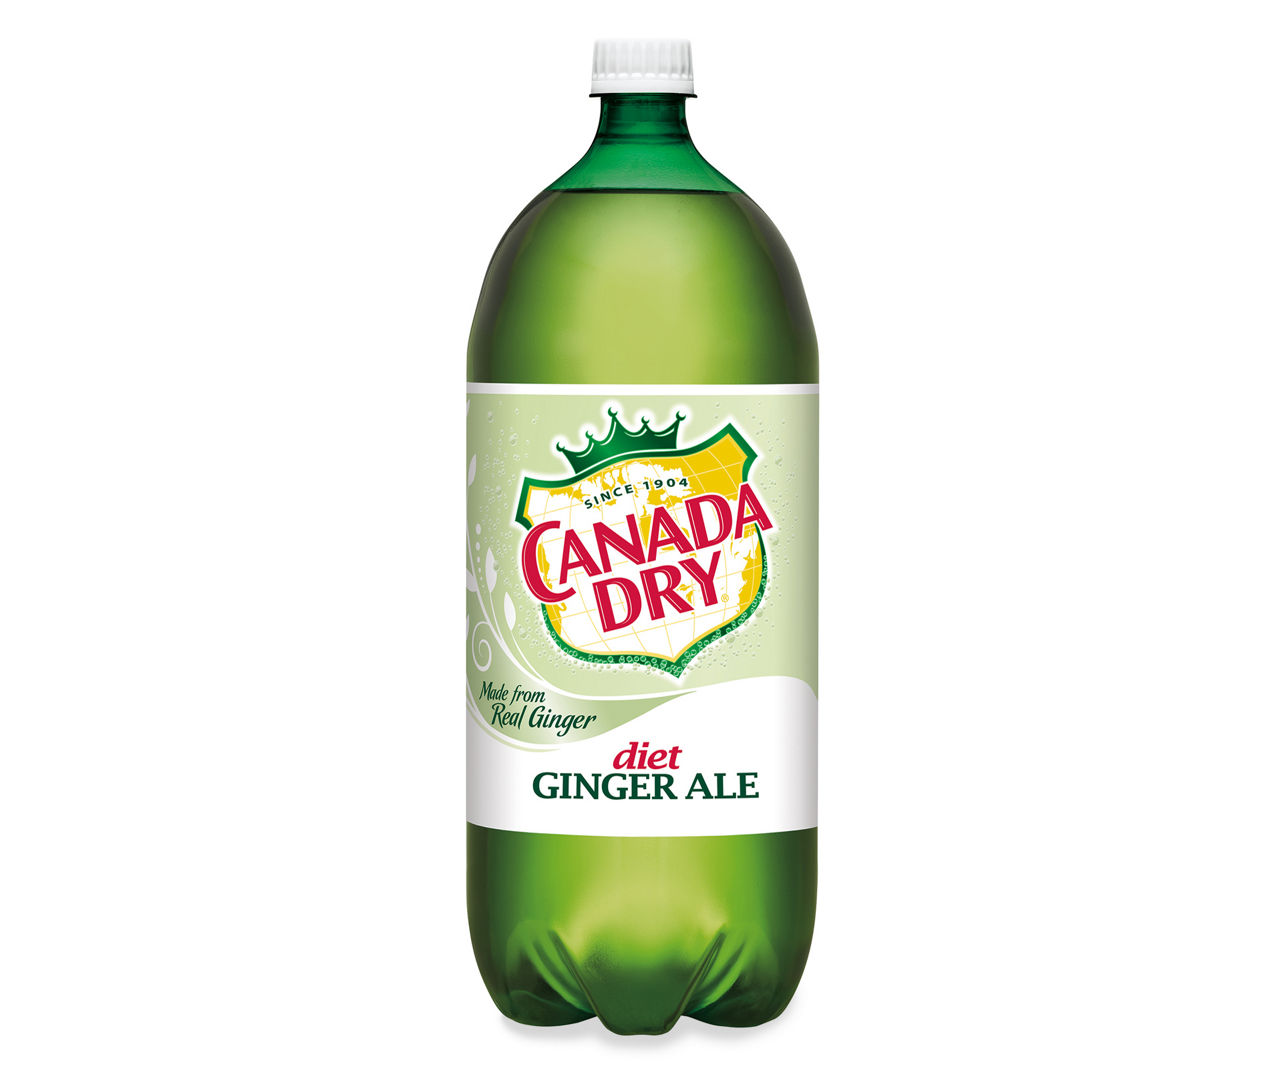 Canada Dry Diet Canada Dry Ginger Ale, 2 L Bottle